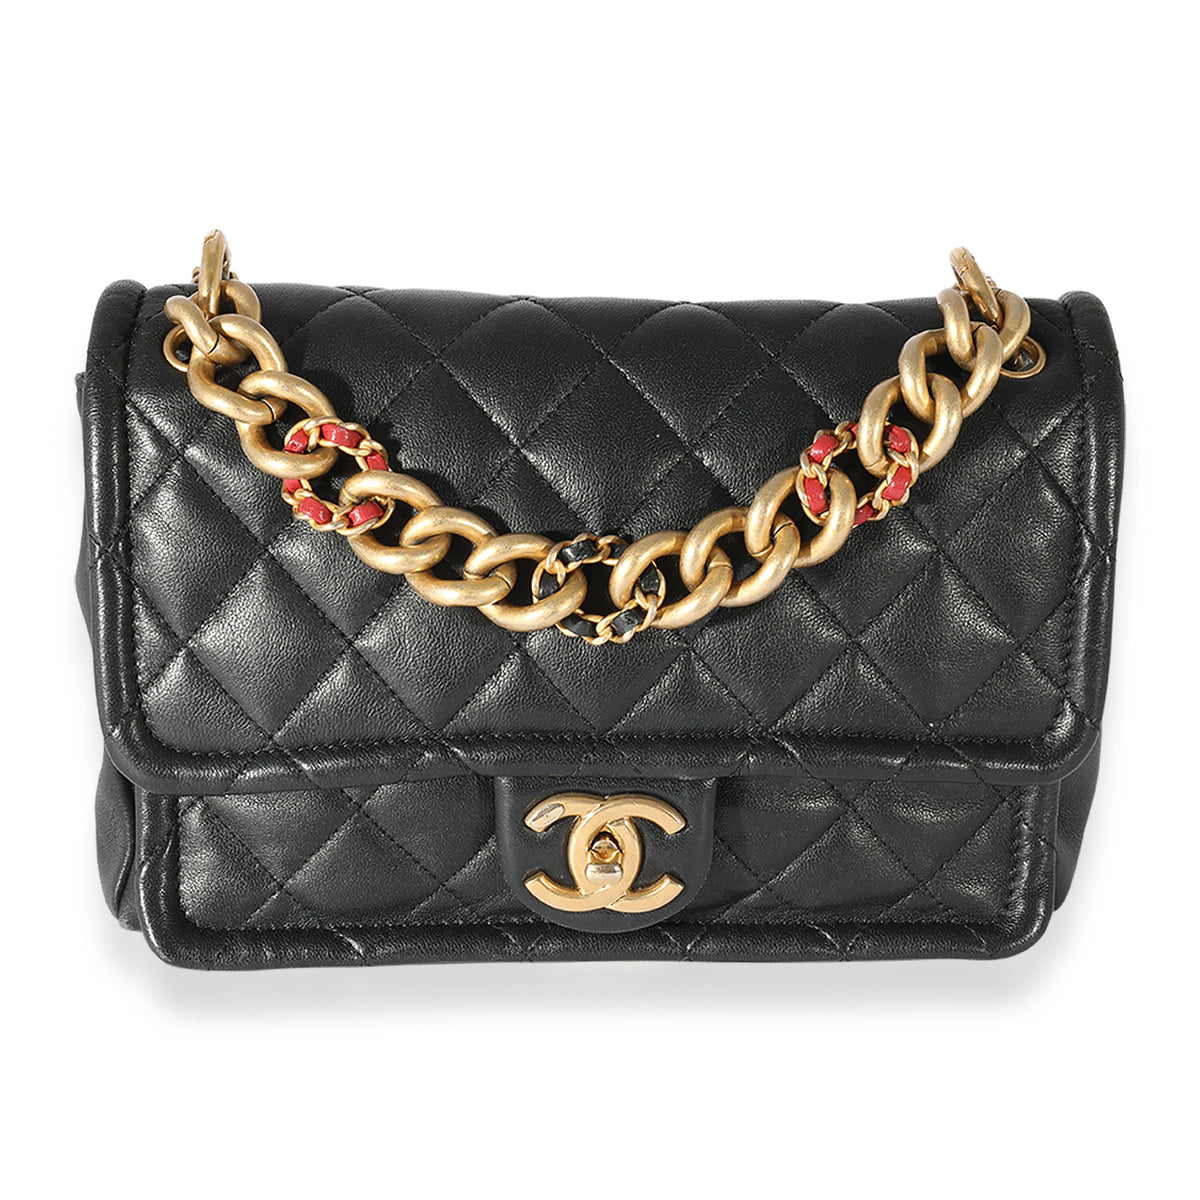 Chanel Black Quilted Lambskin Chain Link Bag